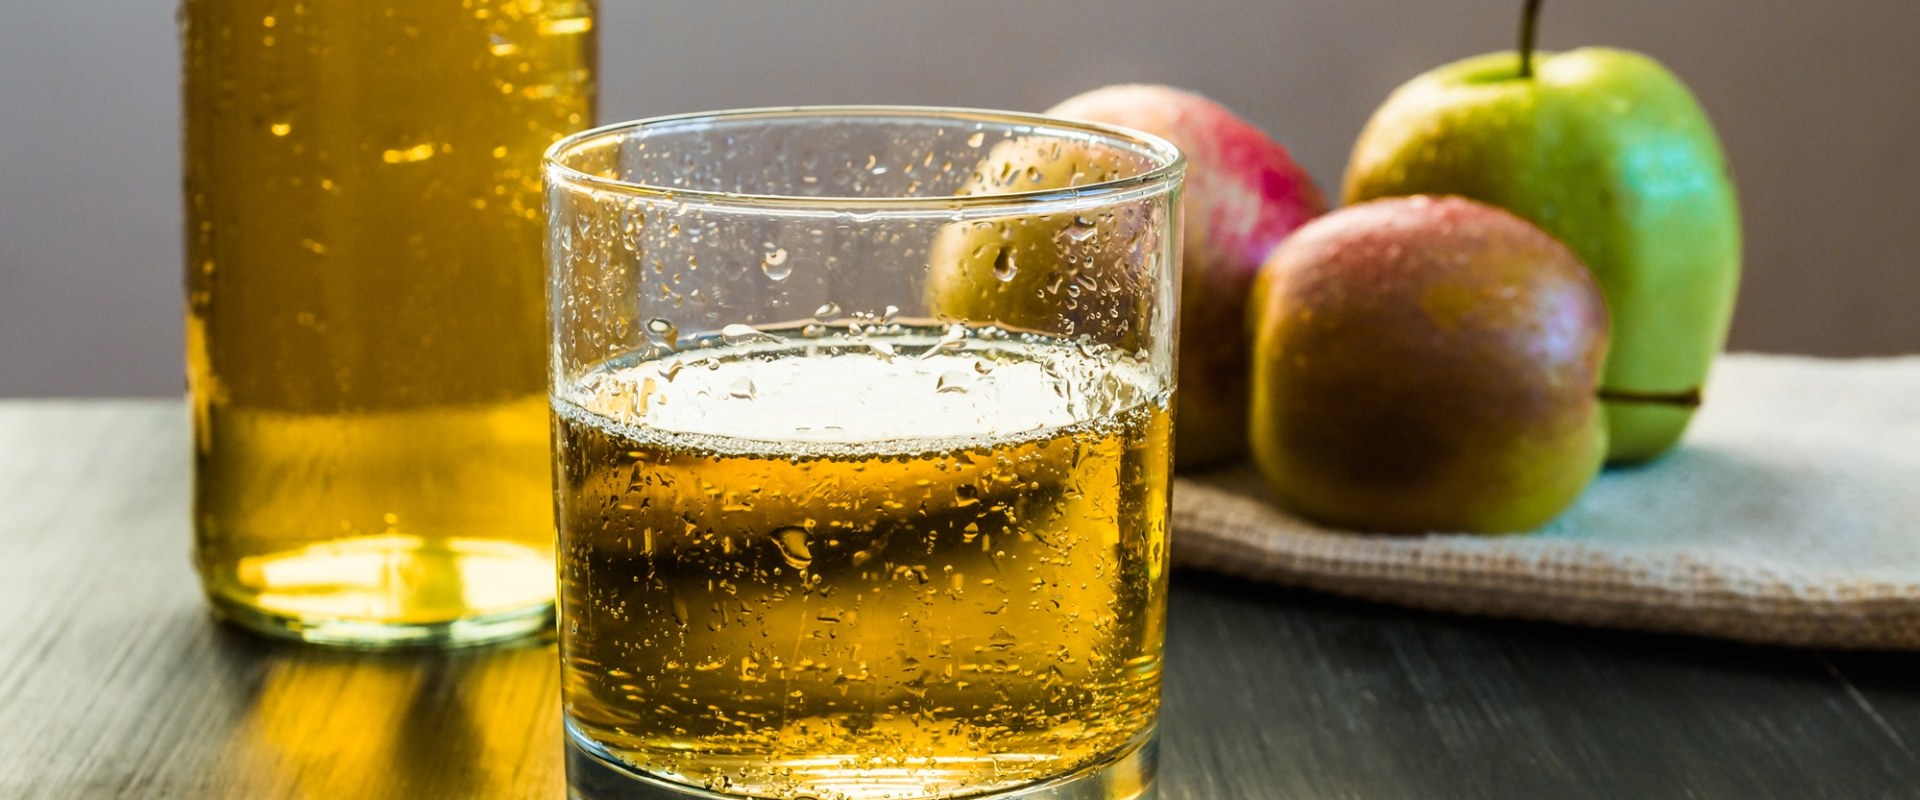 Is cider alcohol beer?